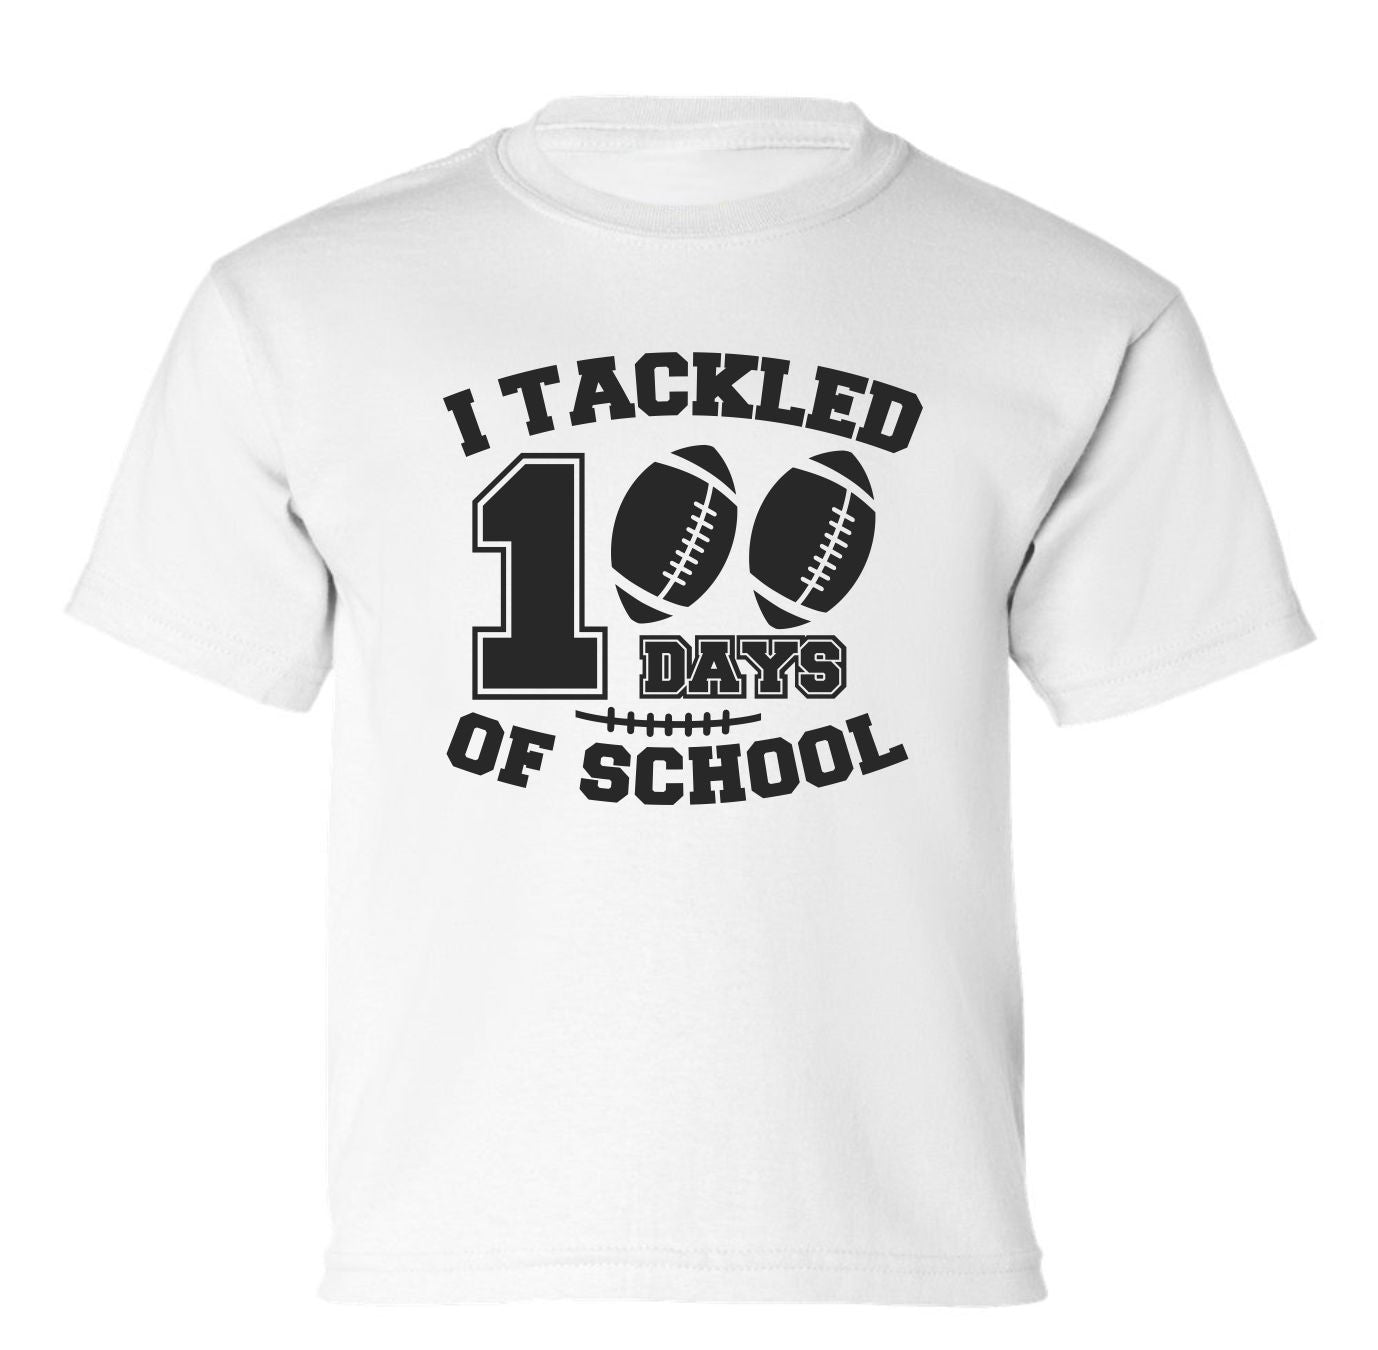 "I Tackled 100 Days Of School" Toddler/Youth T-Shirt